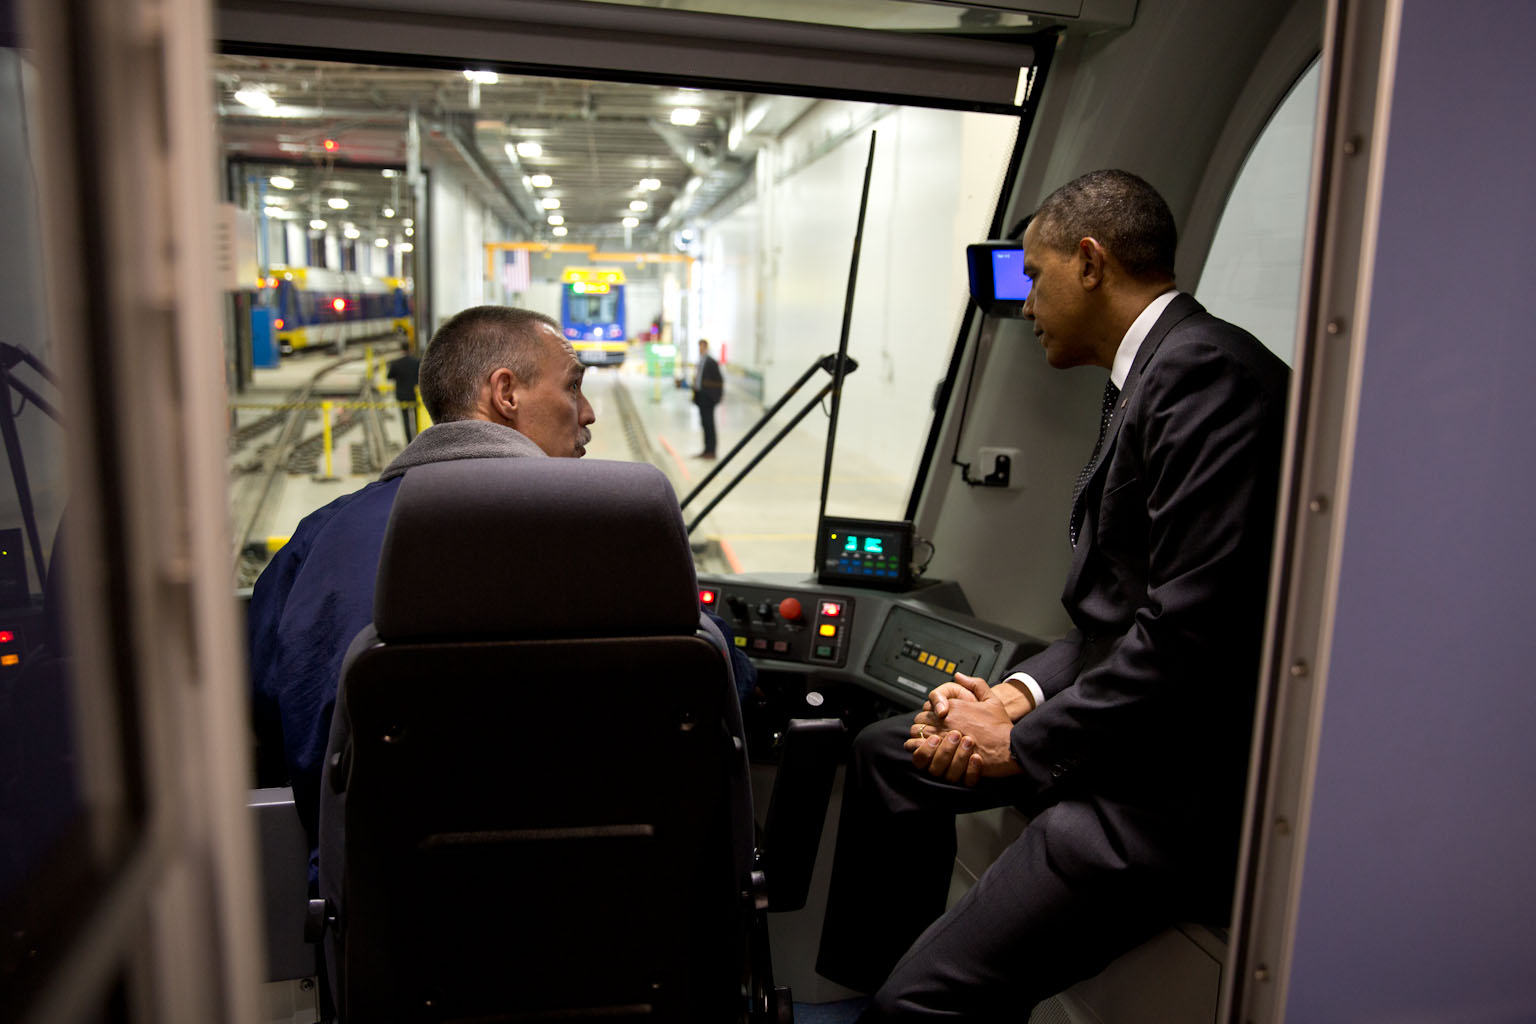 President Barack Obama sits in the cab and talks with a worker during a tour of the Light Rail Maintenance Building in St. Paul, Minn., Feb. 26, 2014.